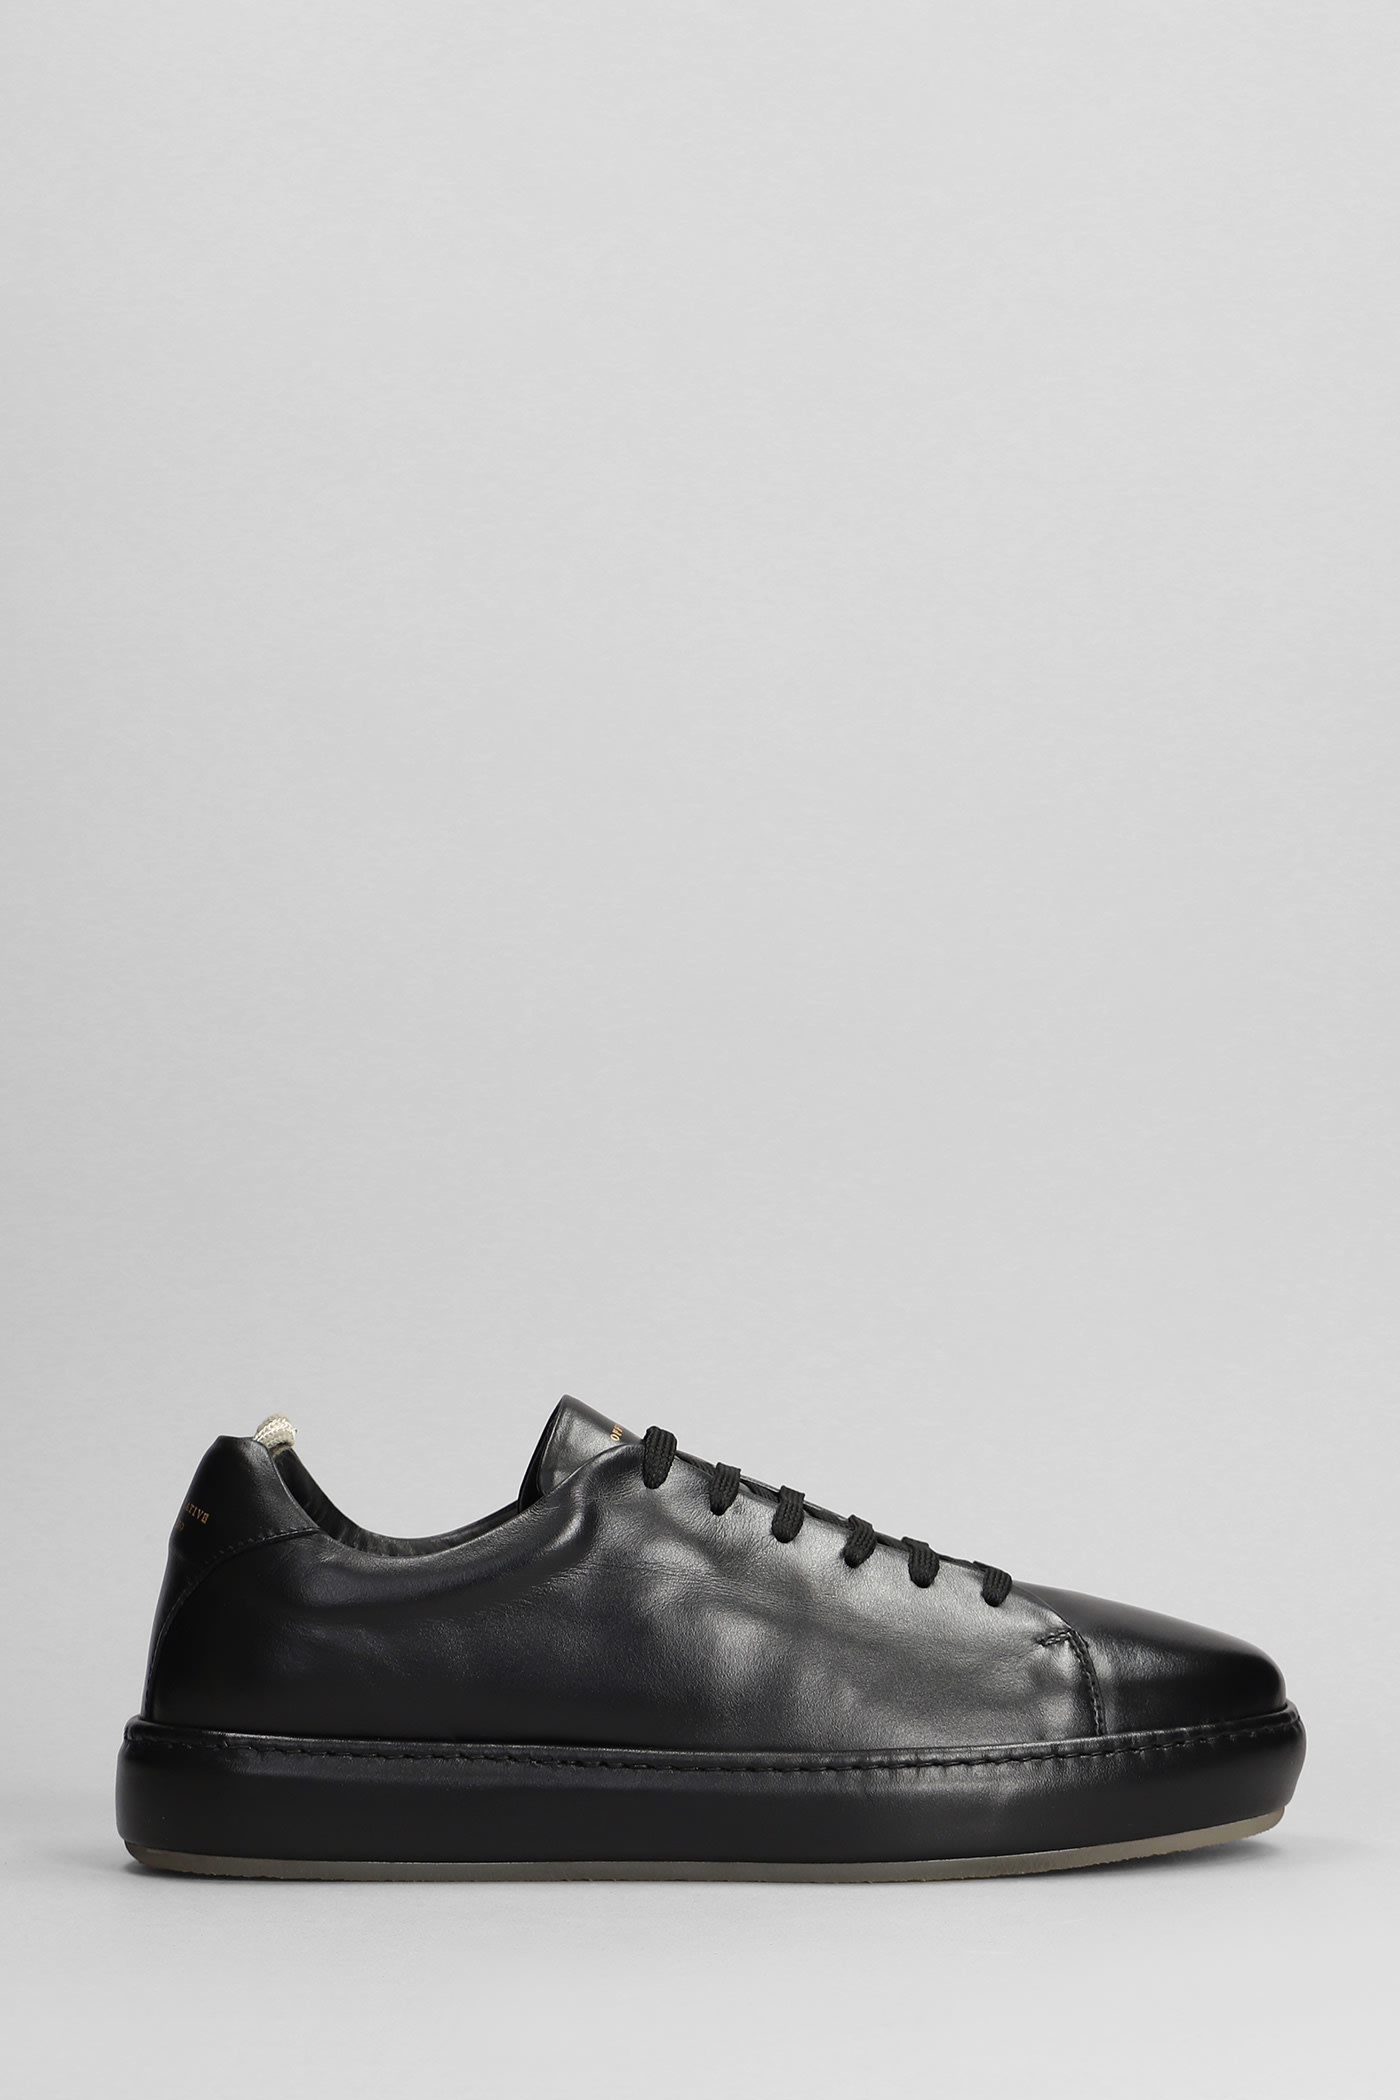 OFFICINE CREATIVE COVERED 001 SNEAKERS IN BLACK LEATHER